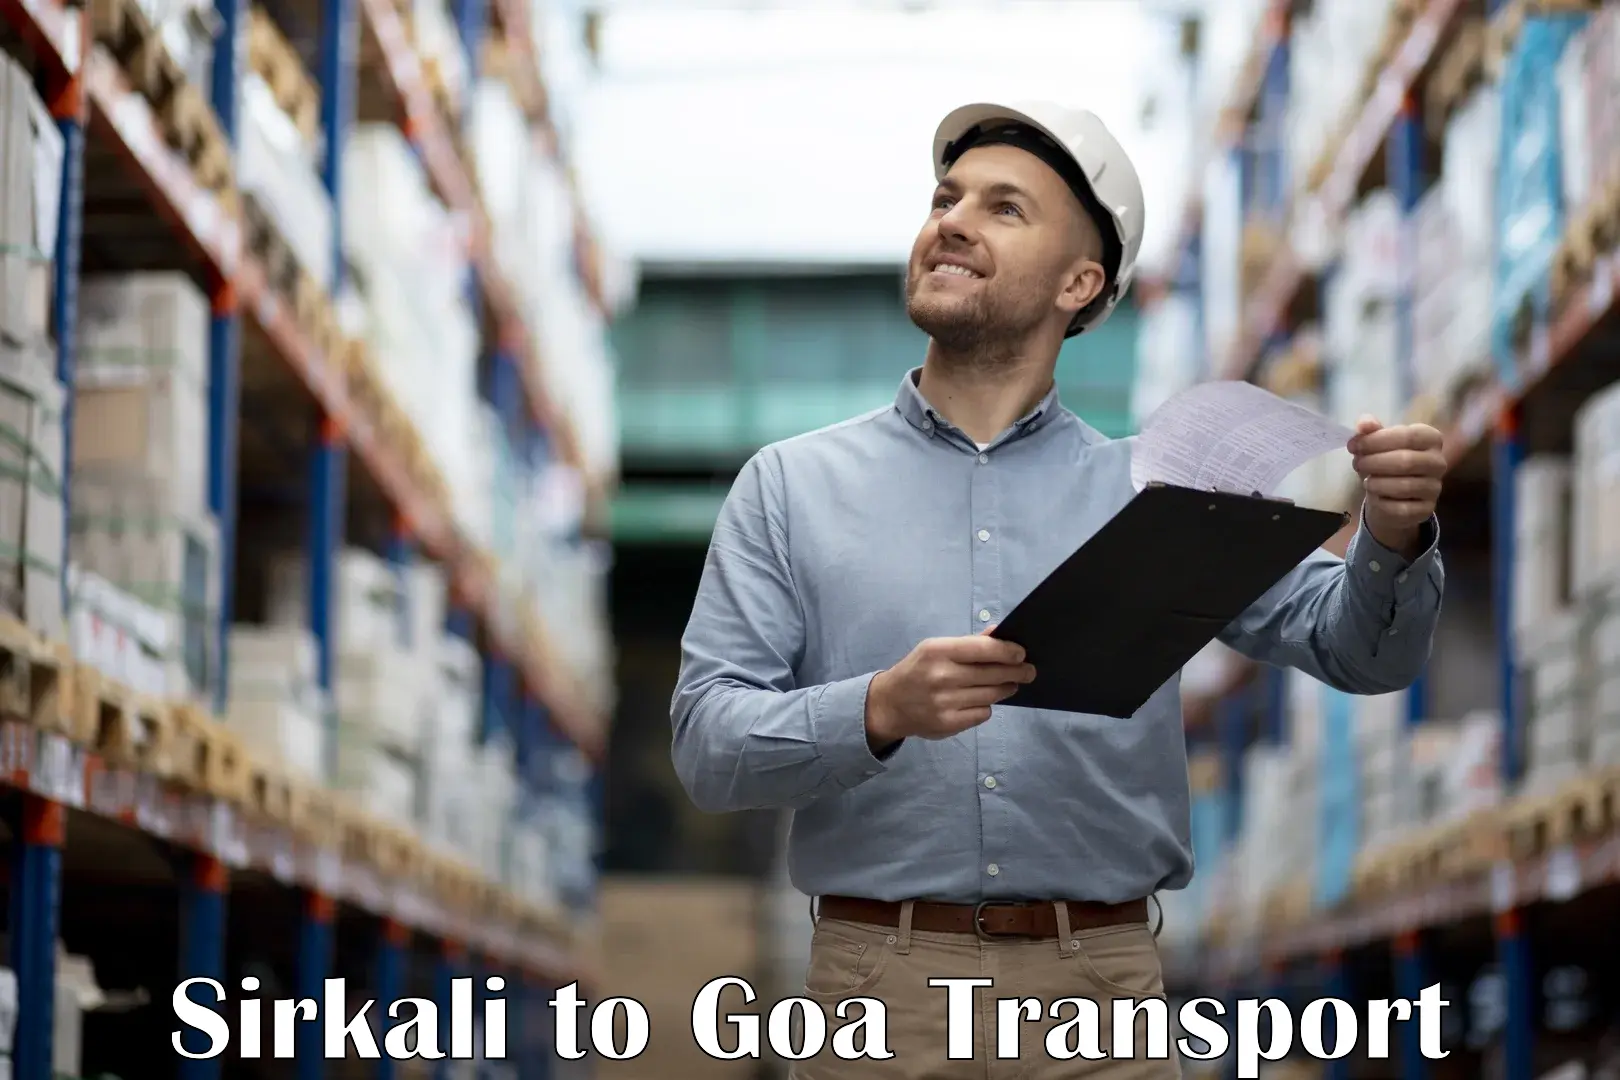 Cycle transportation service Sirkali to Goa